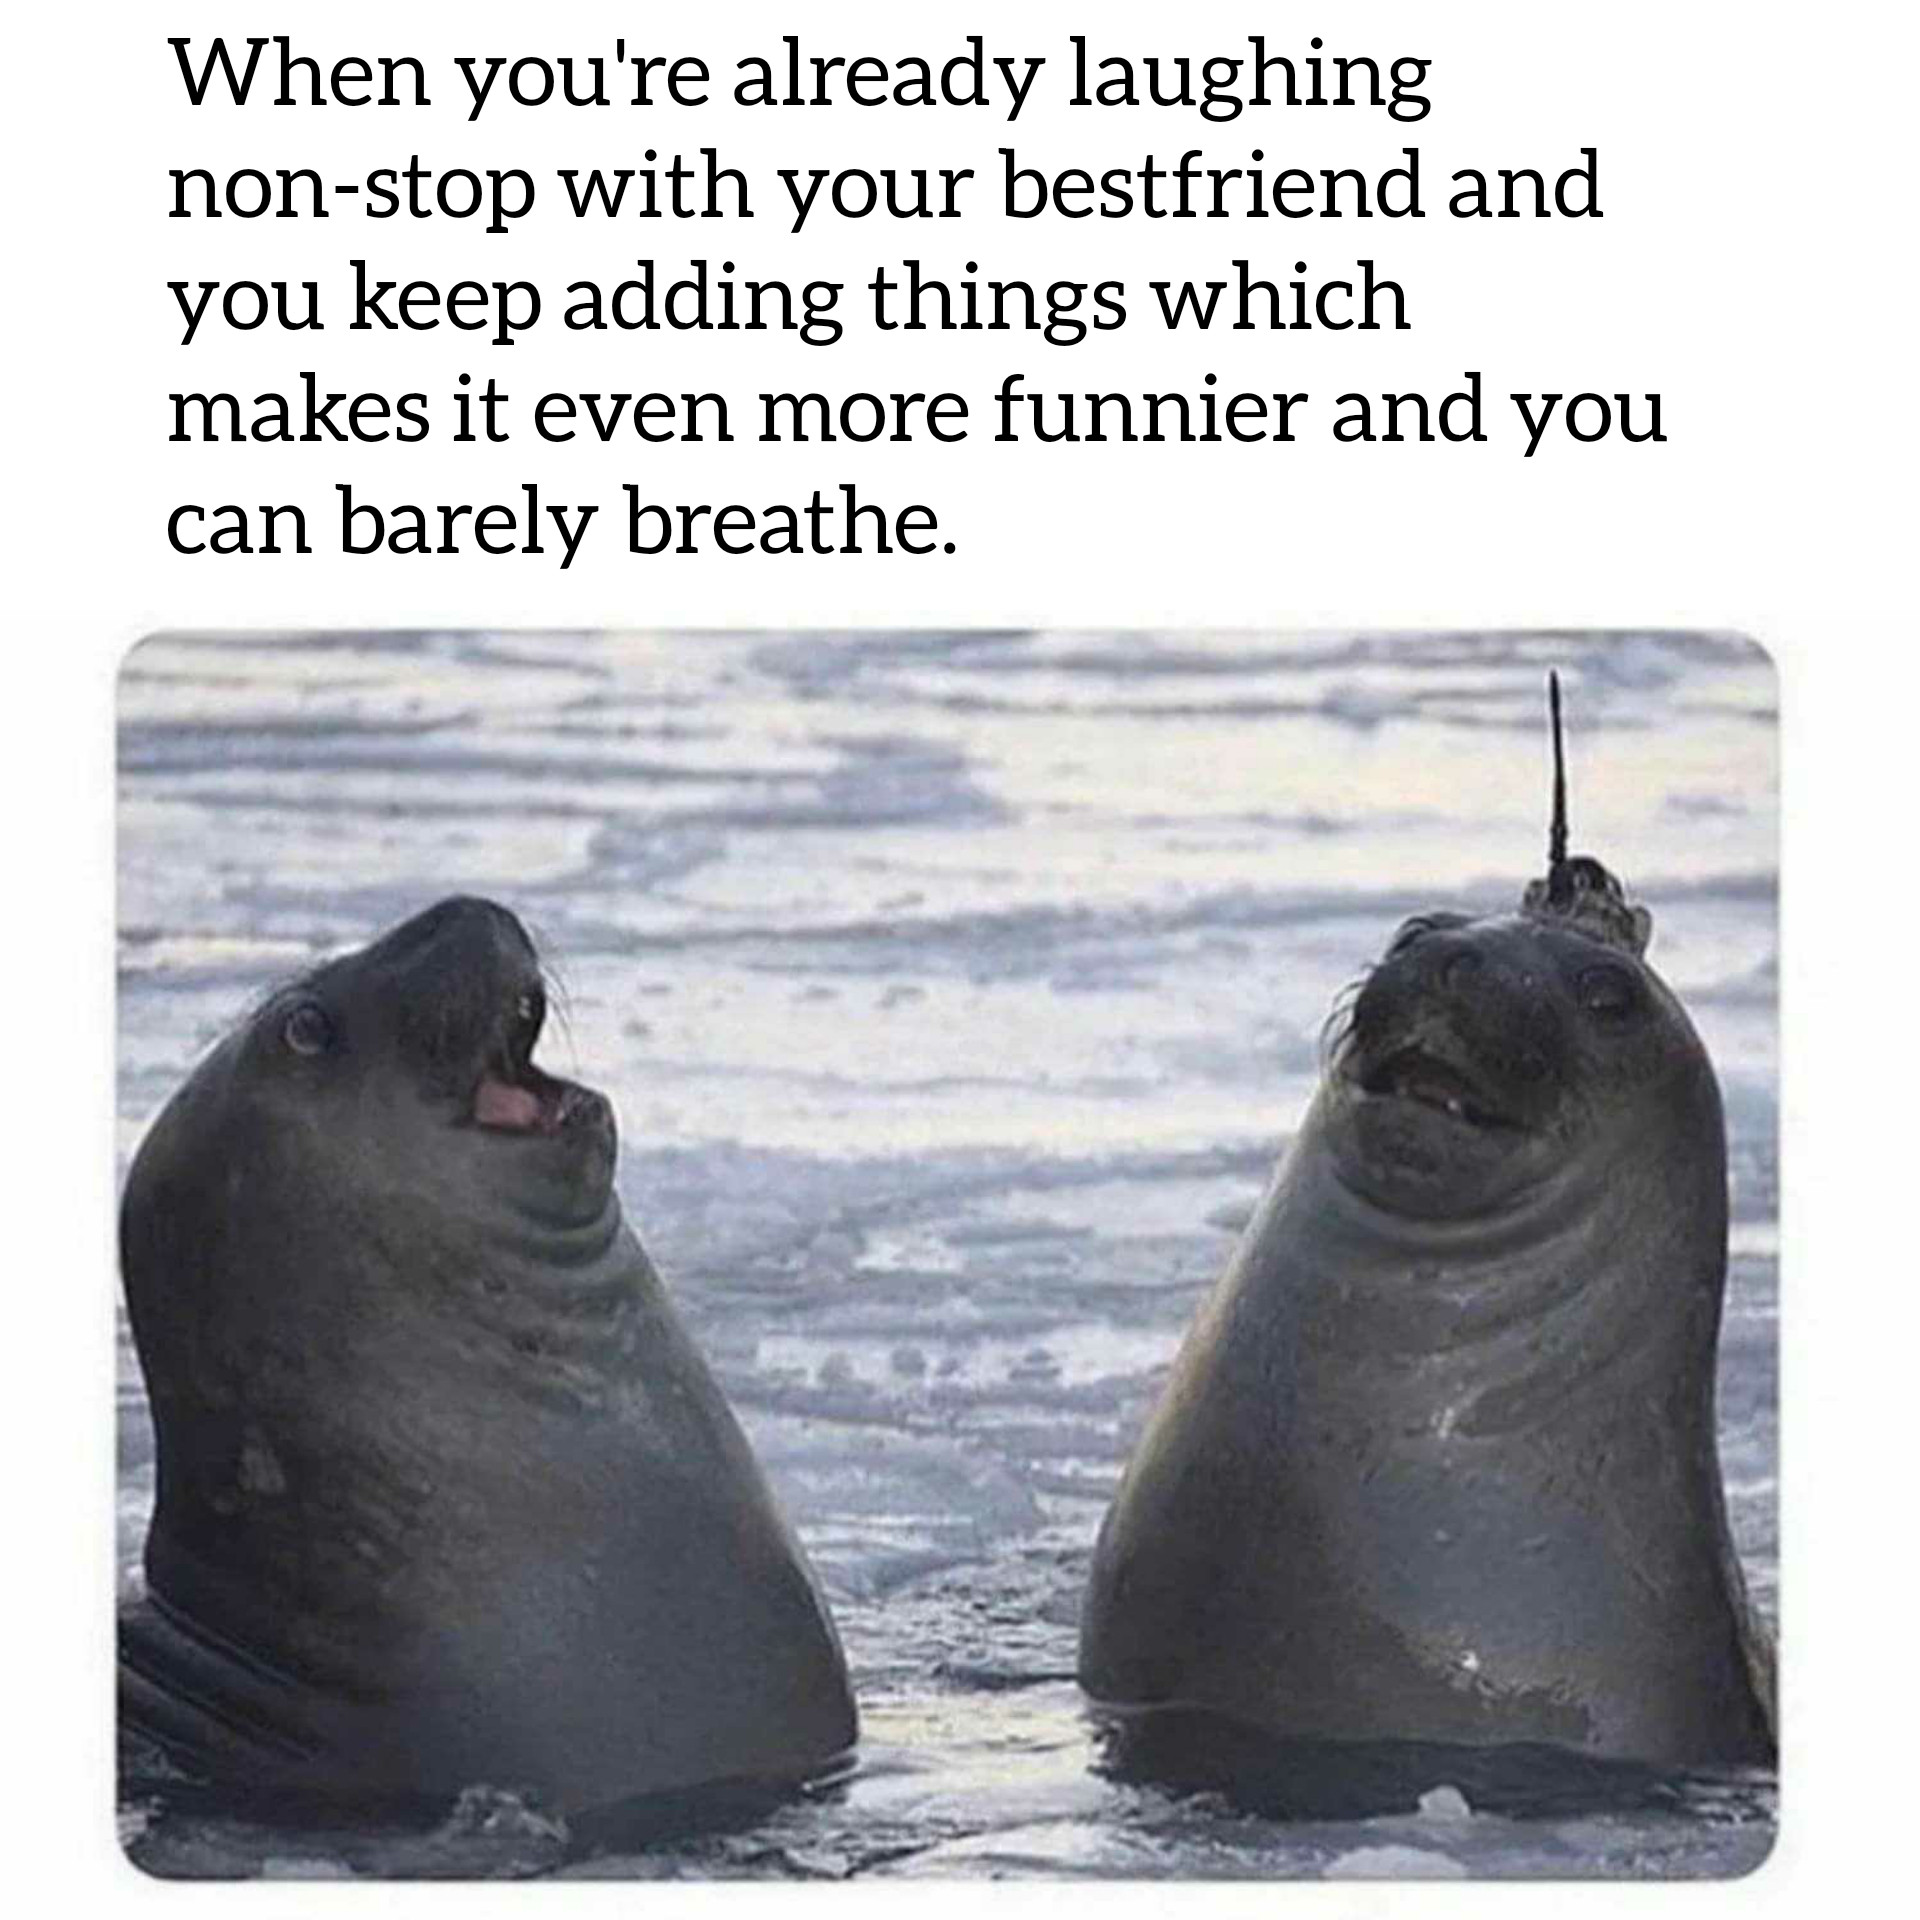 friend that makes you laugh - When you're already laughing nonstop with your bestfriend and you keep adding things which makes it even more funnier and you can barely breathe.